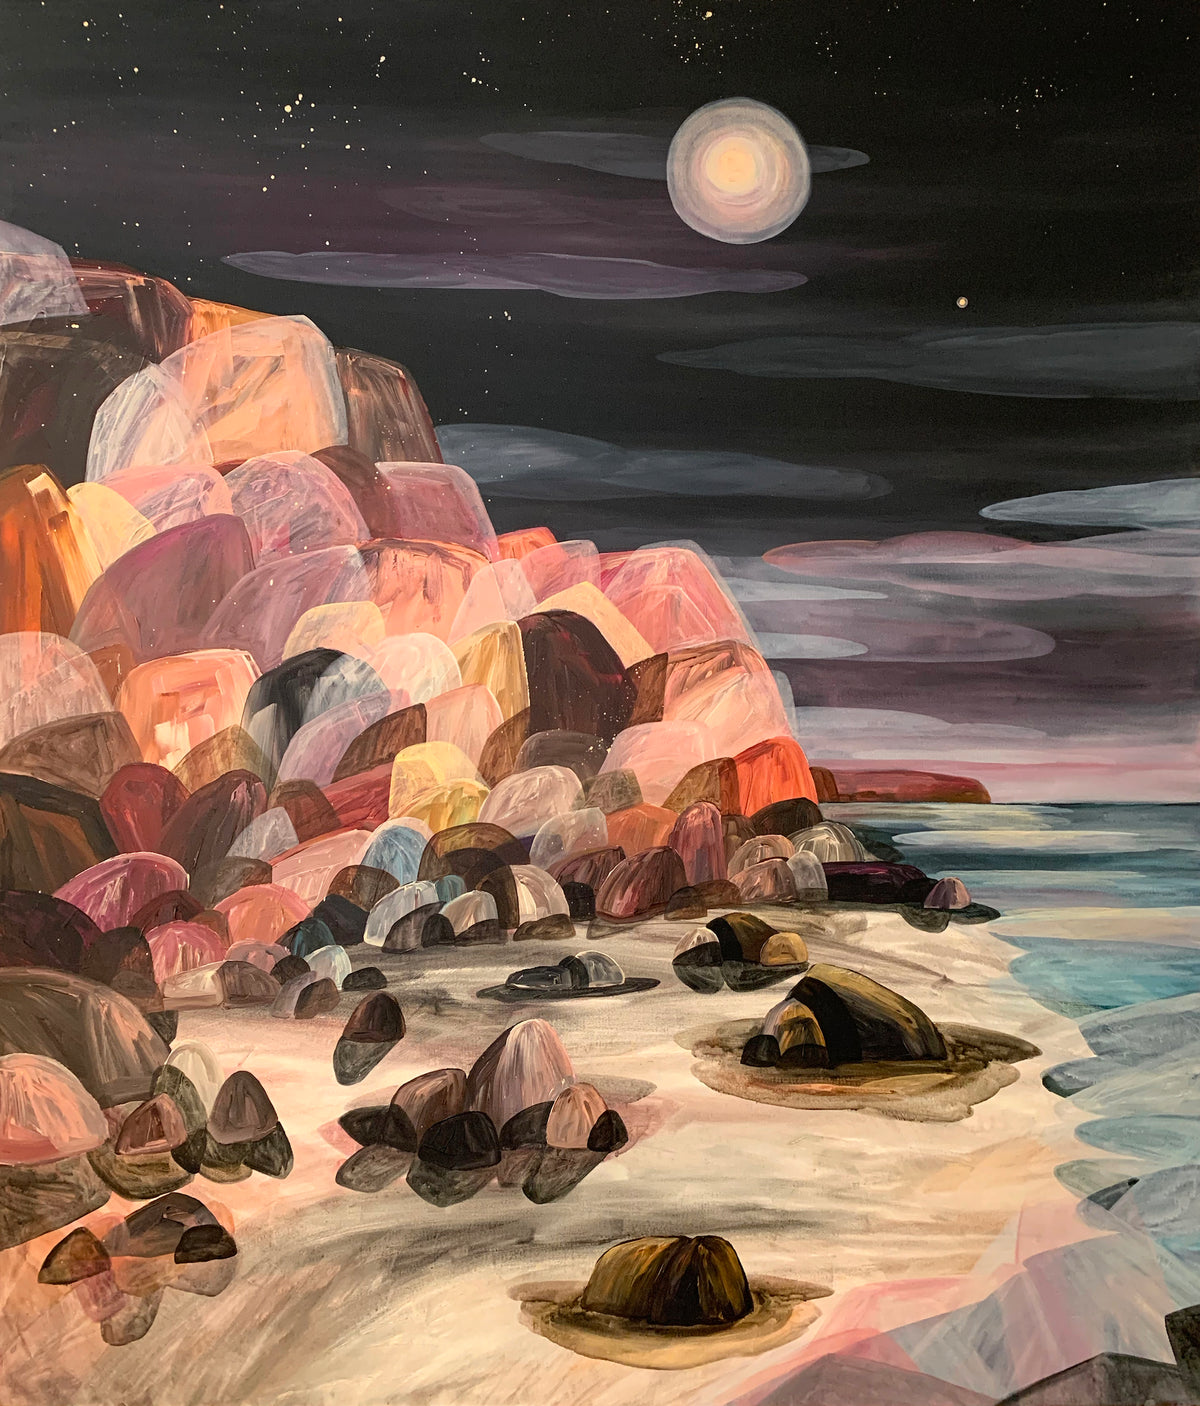 Dreaming Under a Pink Super Moon, The Cliffs of Deep Time Shimmer in its Glow